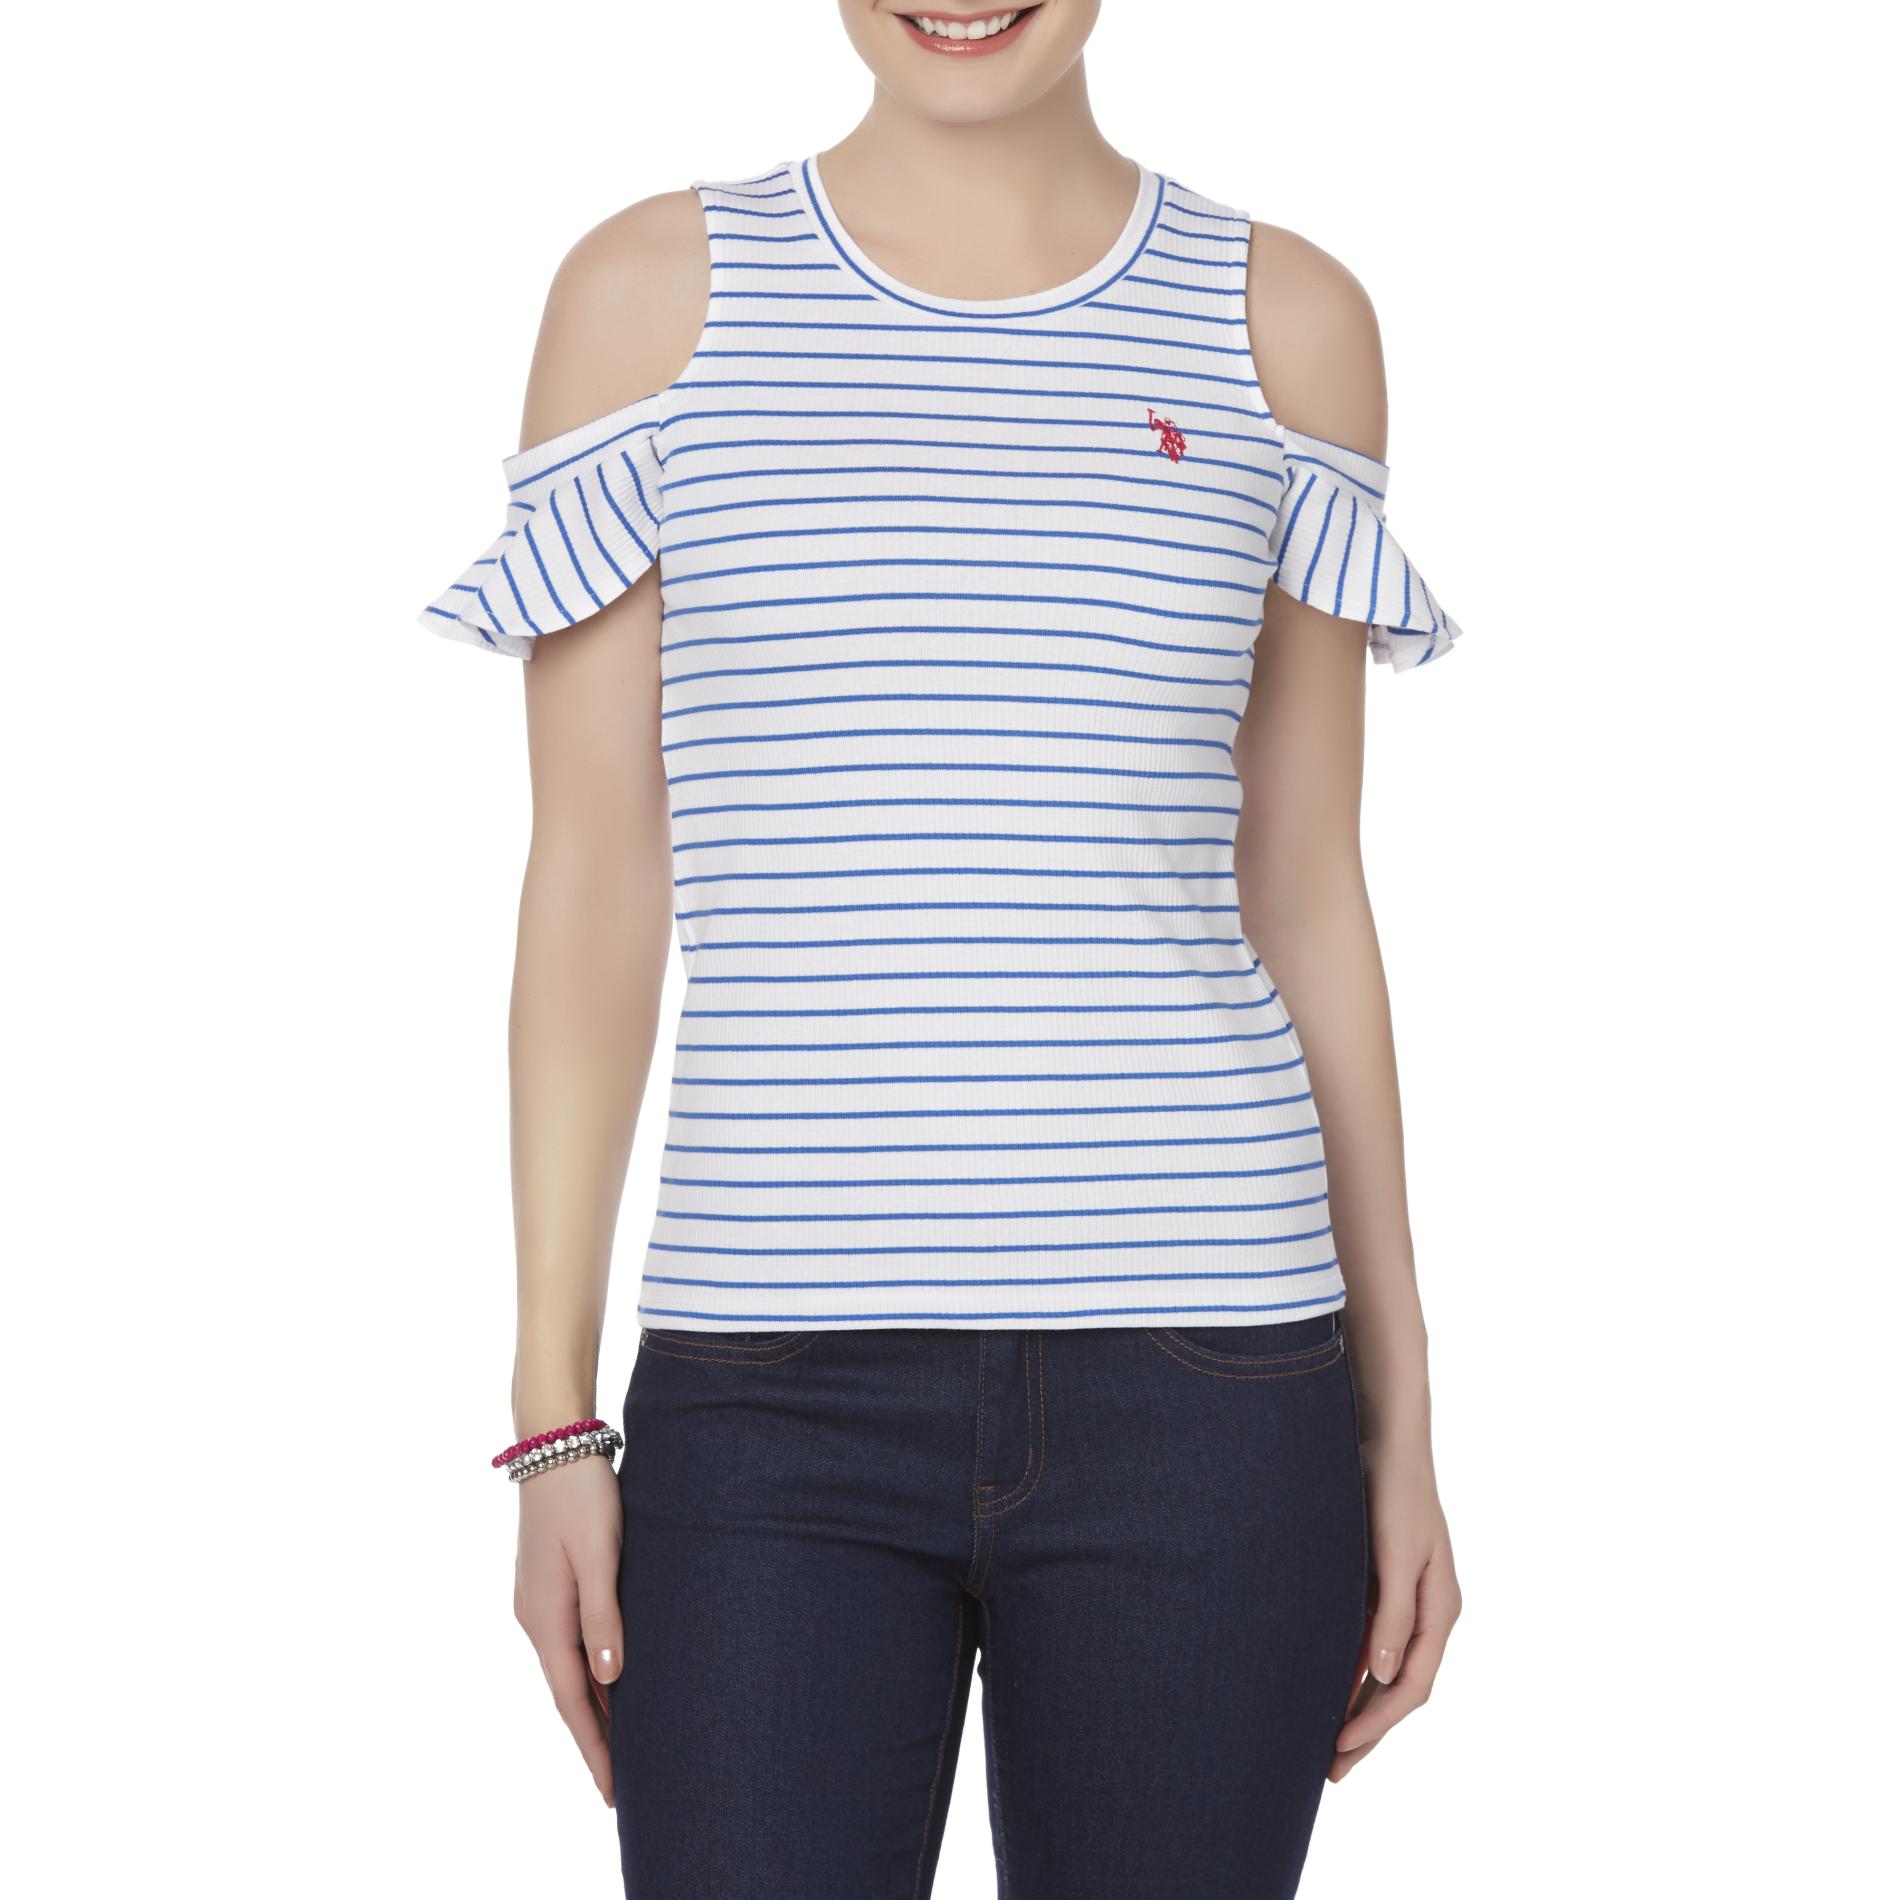 U.S. Polo Assn. Juniors' Cold Shoulder Ribbed Top - Striped